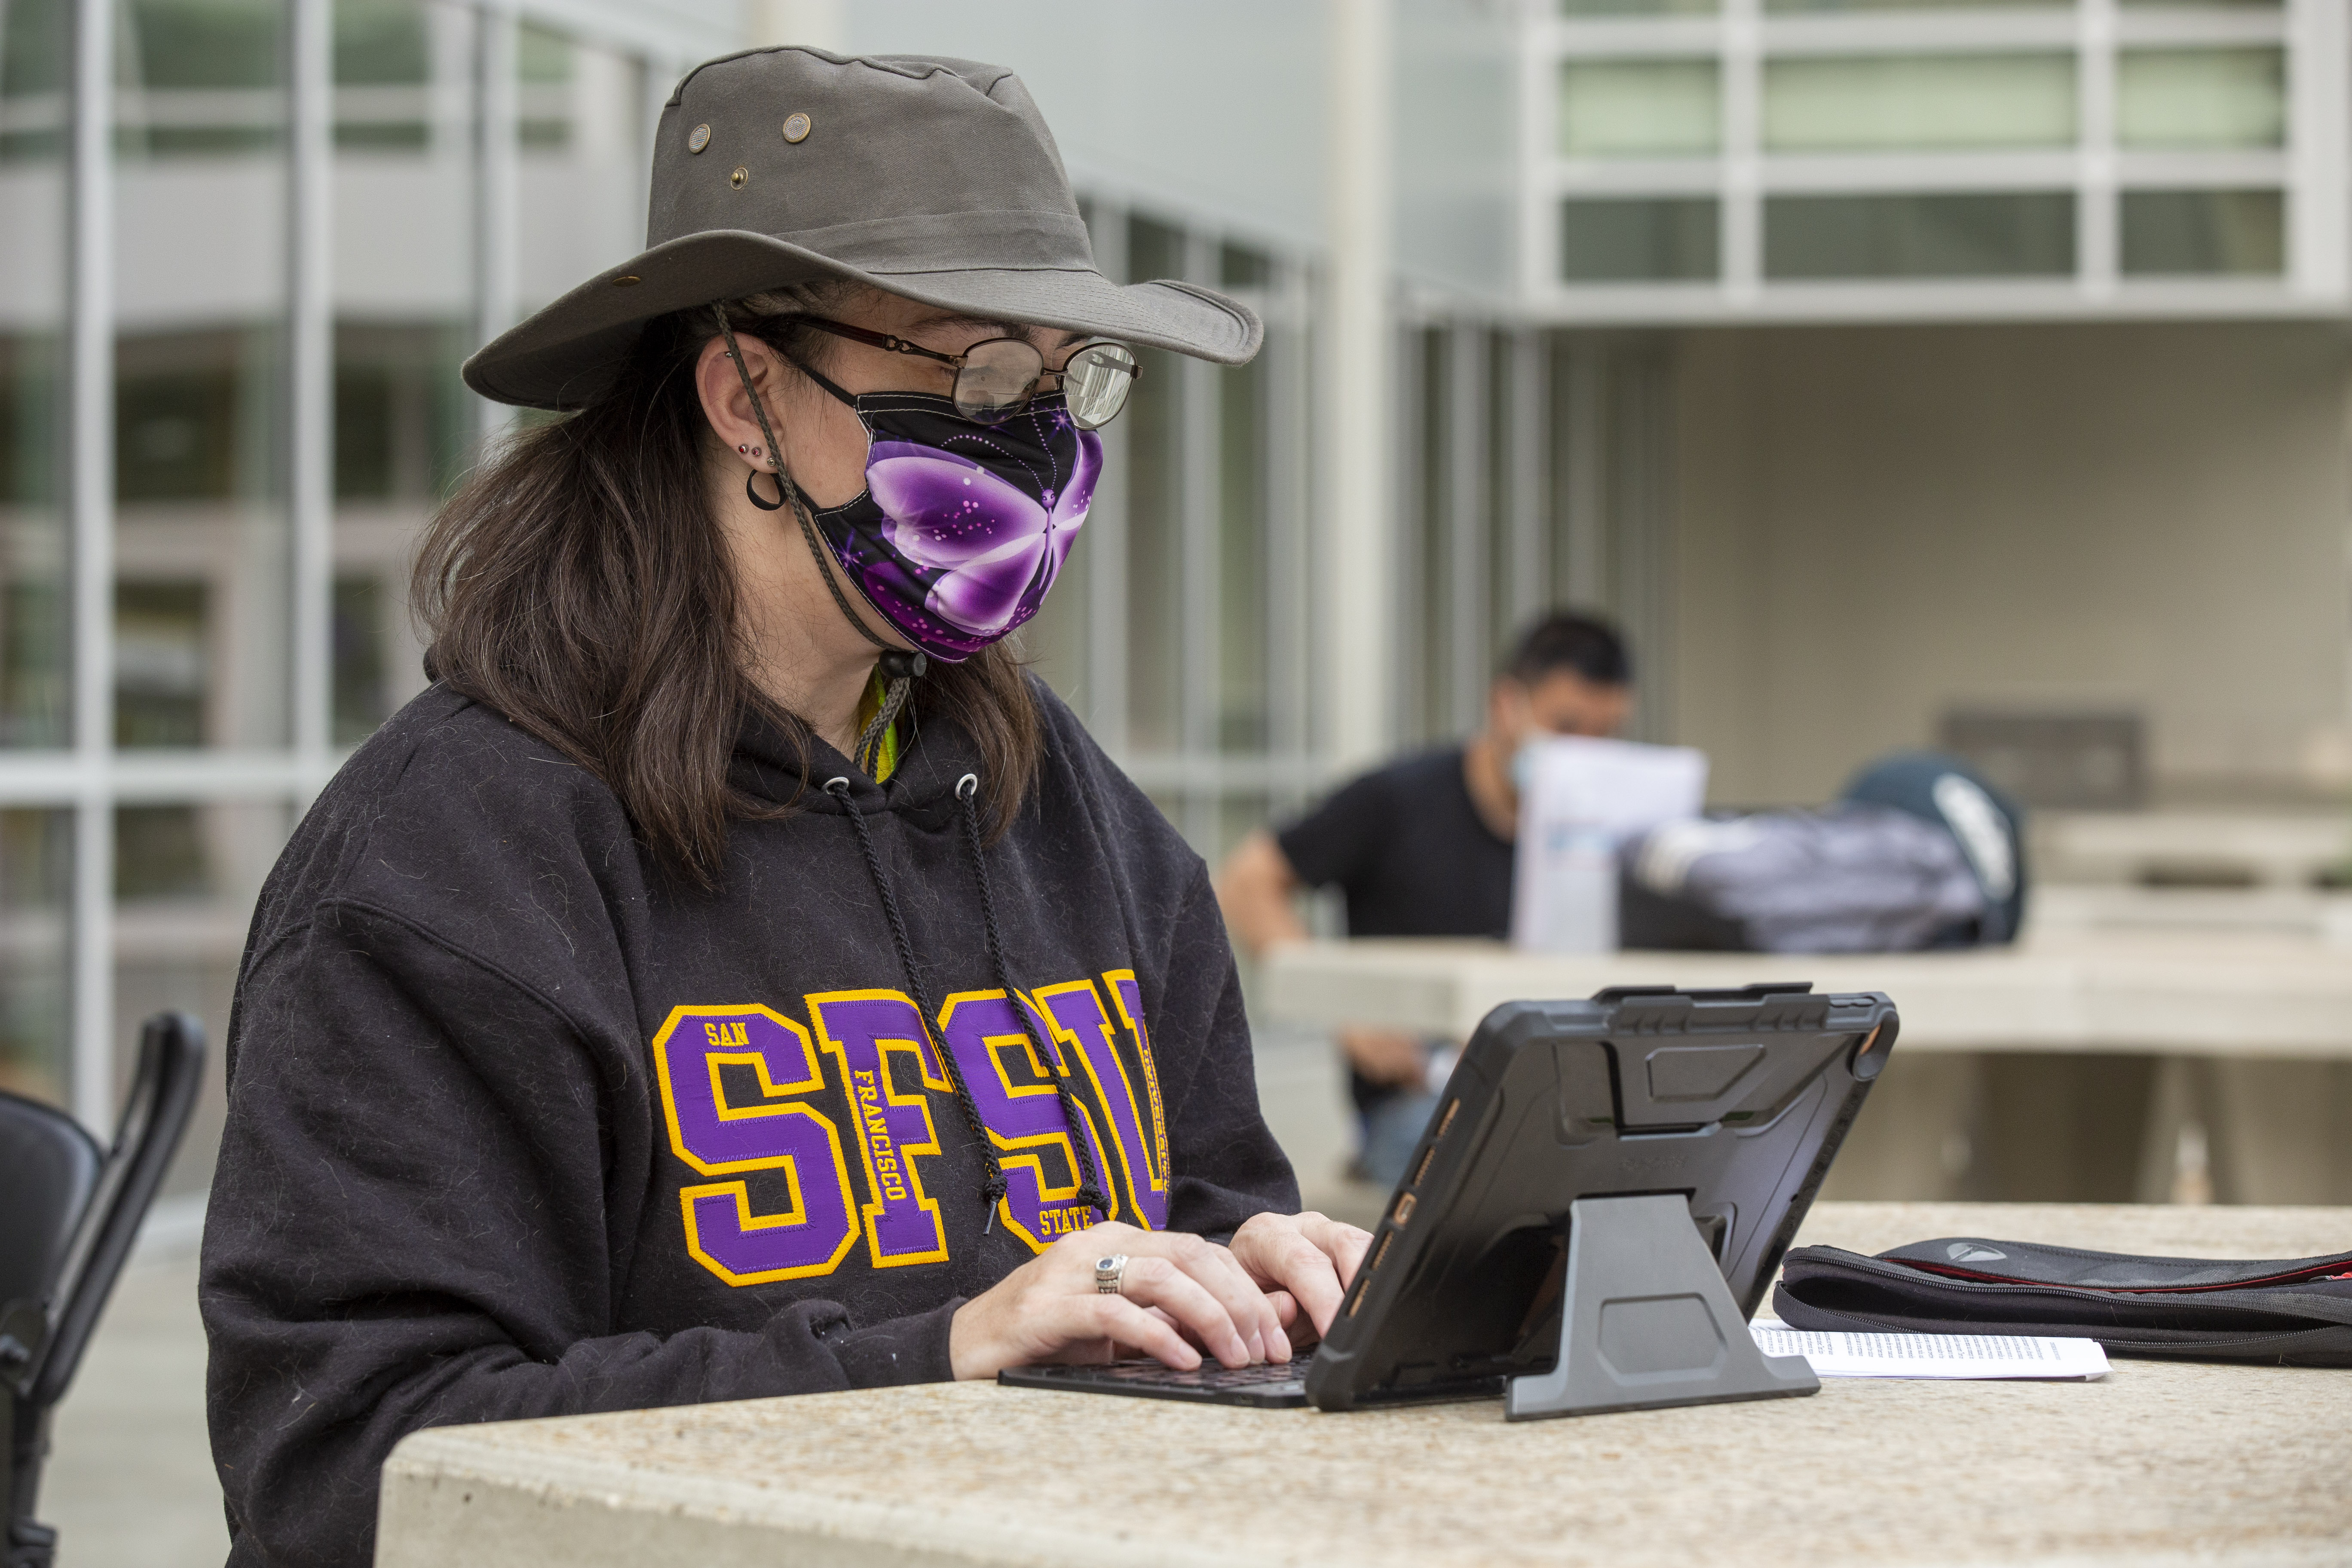 Student with SFSU hoodie working on a laptop